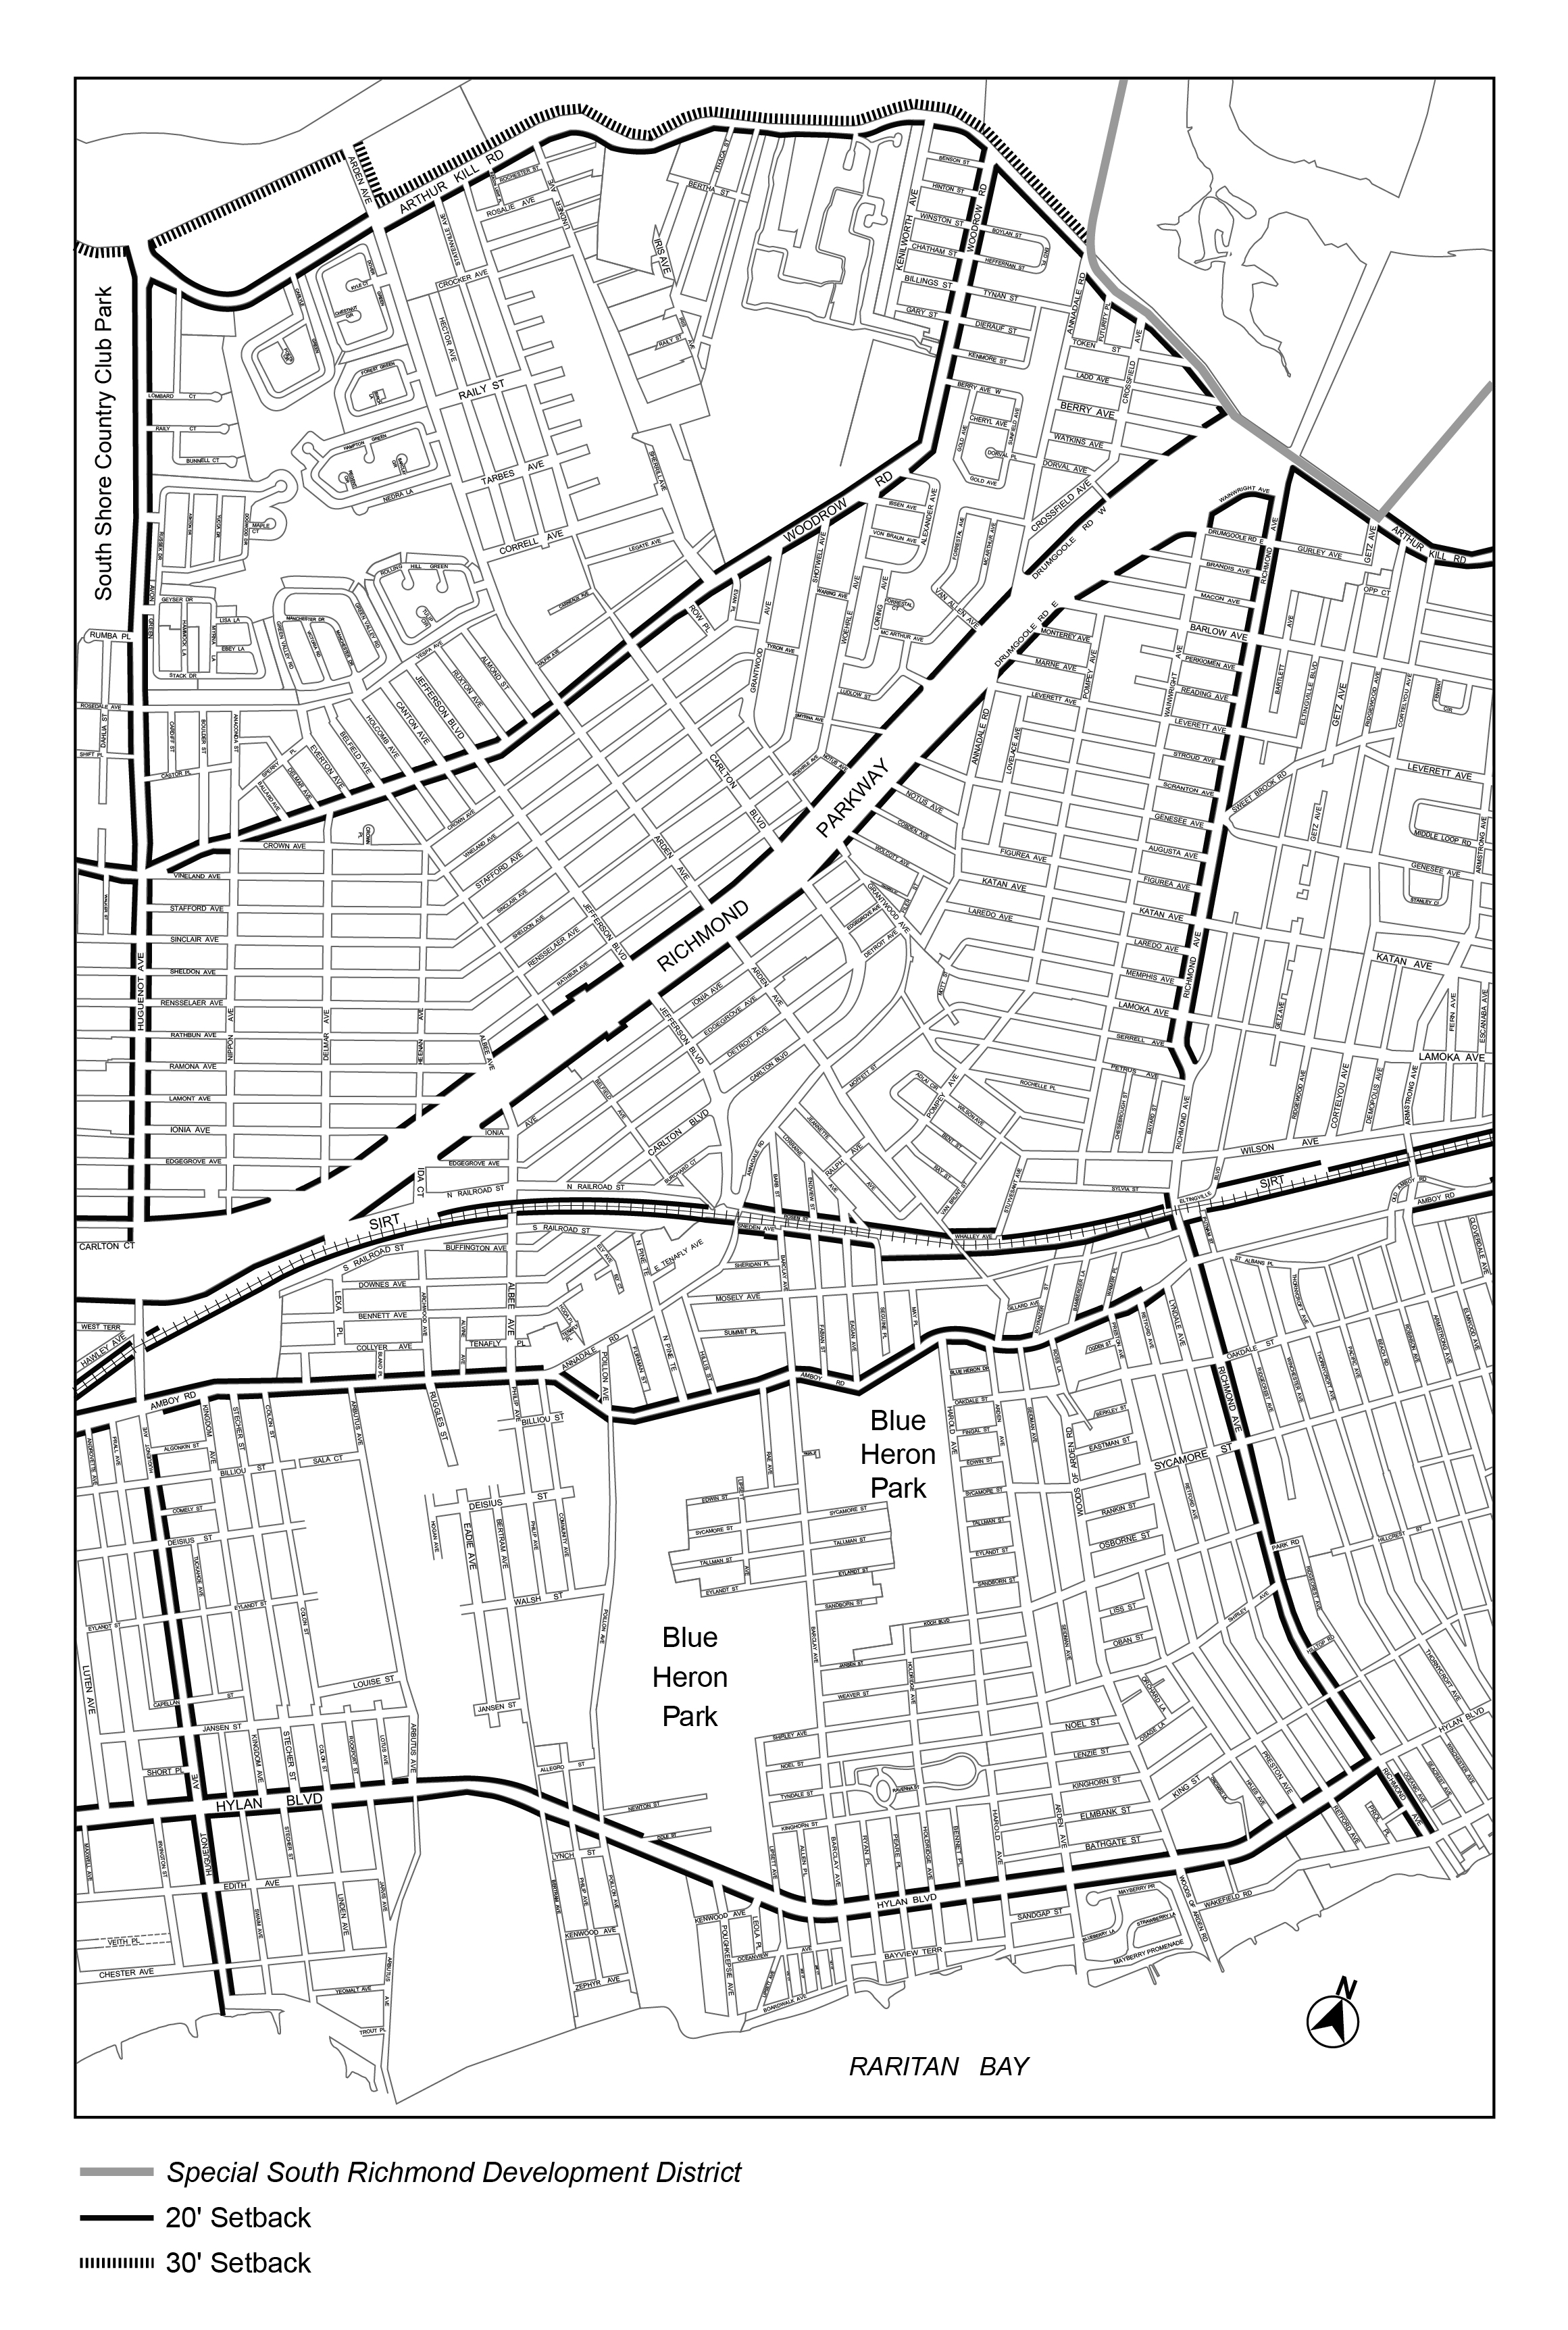 Article X, Chapter 7, Appendix A, Map 2.3 amended per N 230112 ZRR (South Richmond Zoning Relief) adopted by City Council 11/2/23